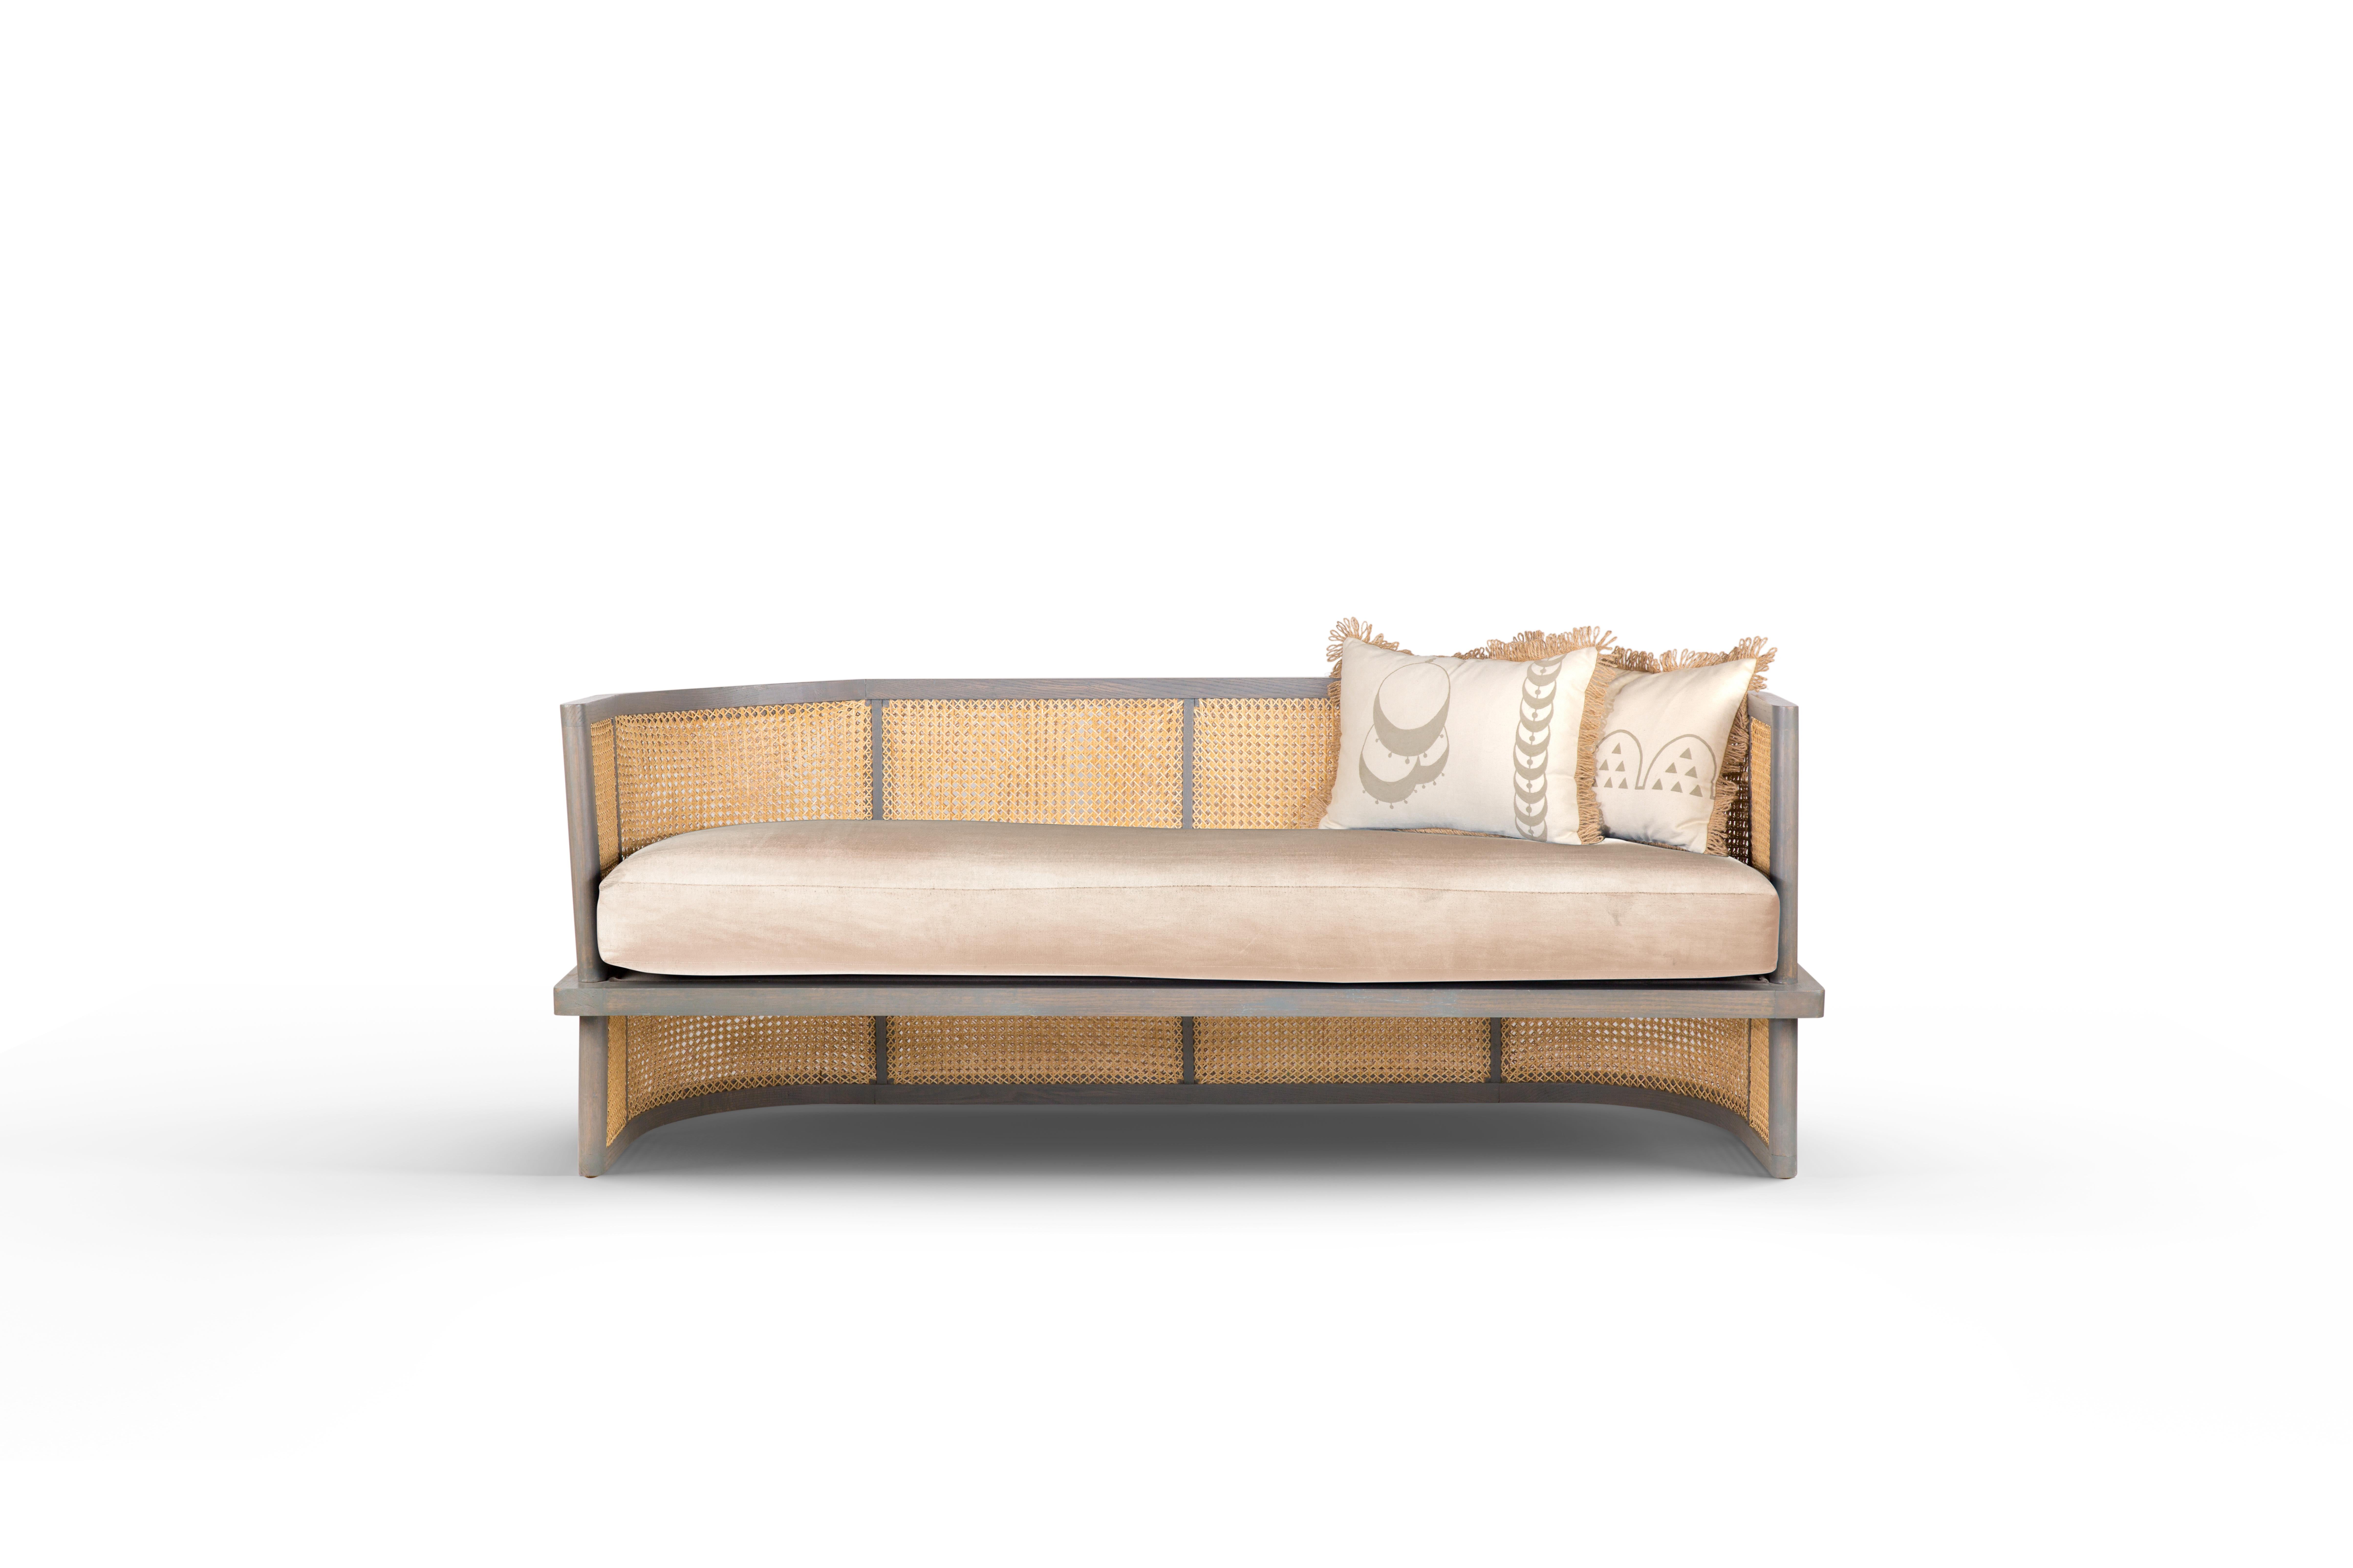 Egyptian Oak Wood and Cané 2-Seater Sofa with Velvet Upholstery